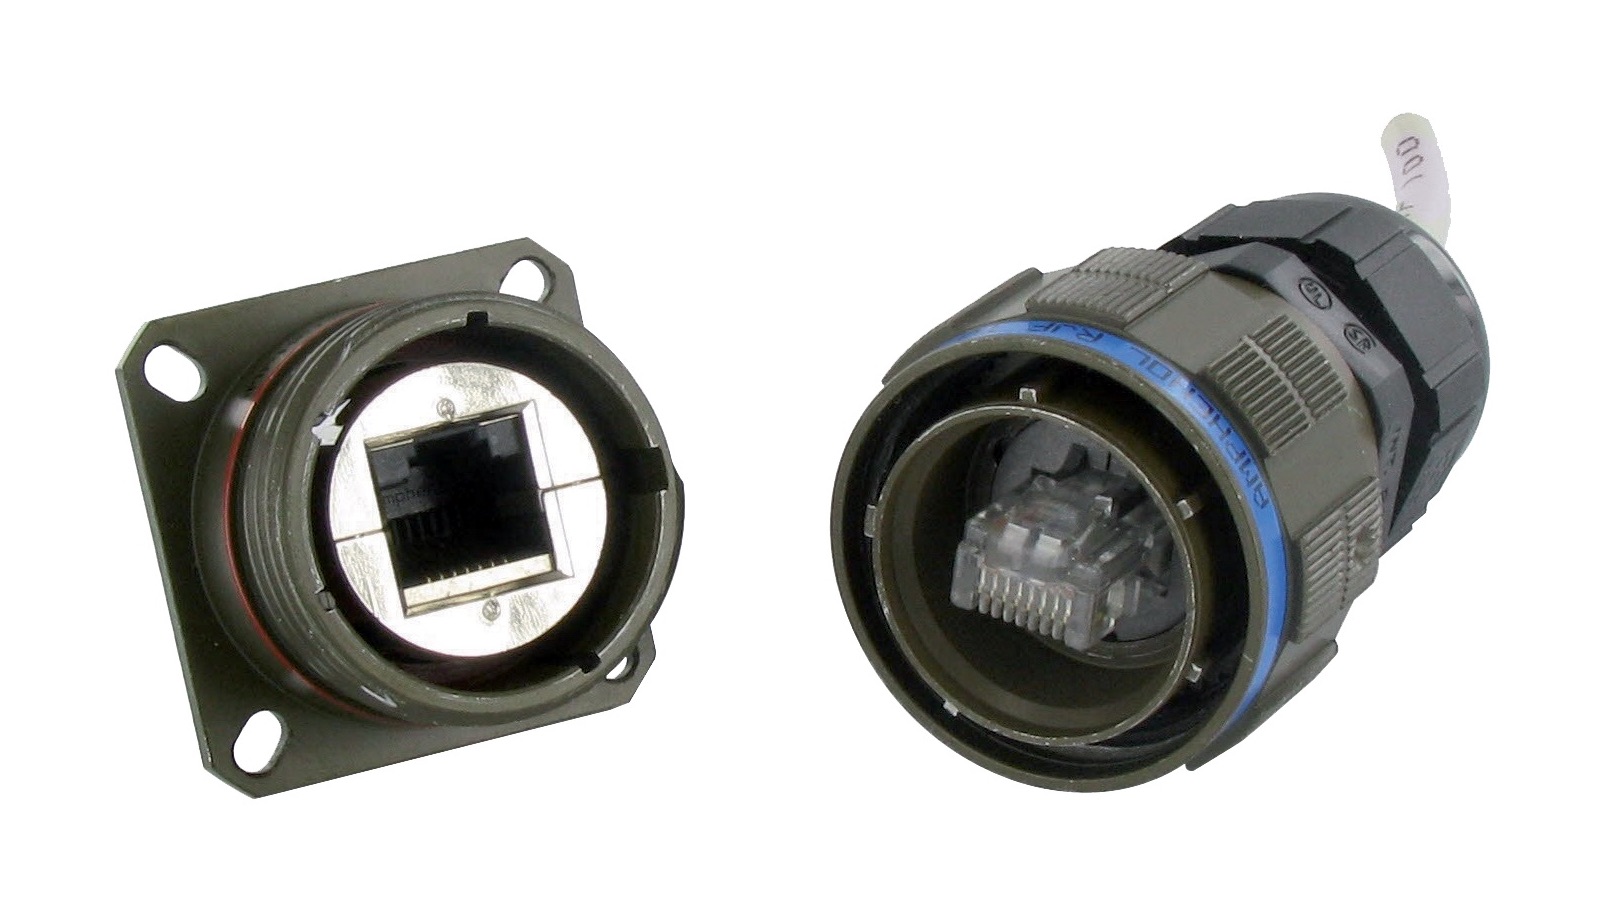 mobile equipment Ethernet connectors from Amphenol and PEI Genesis